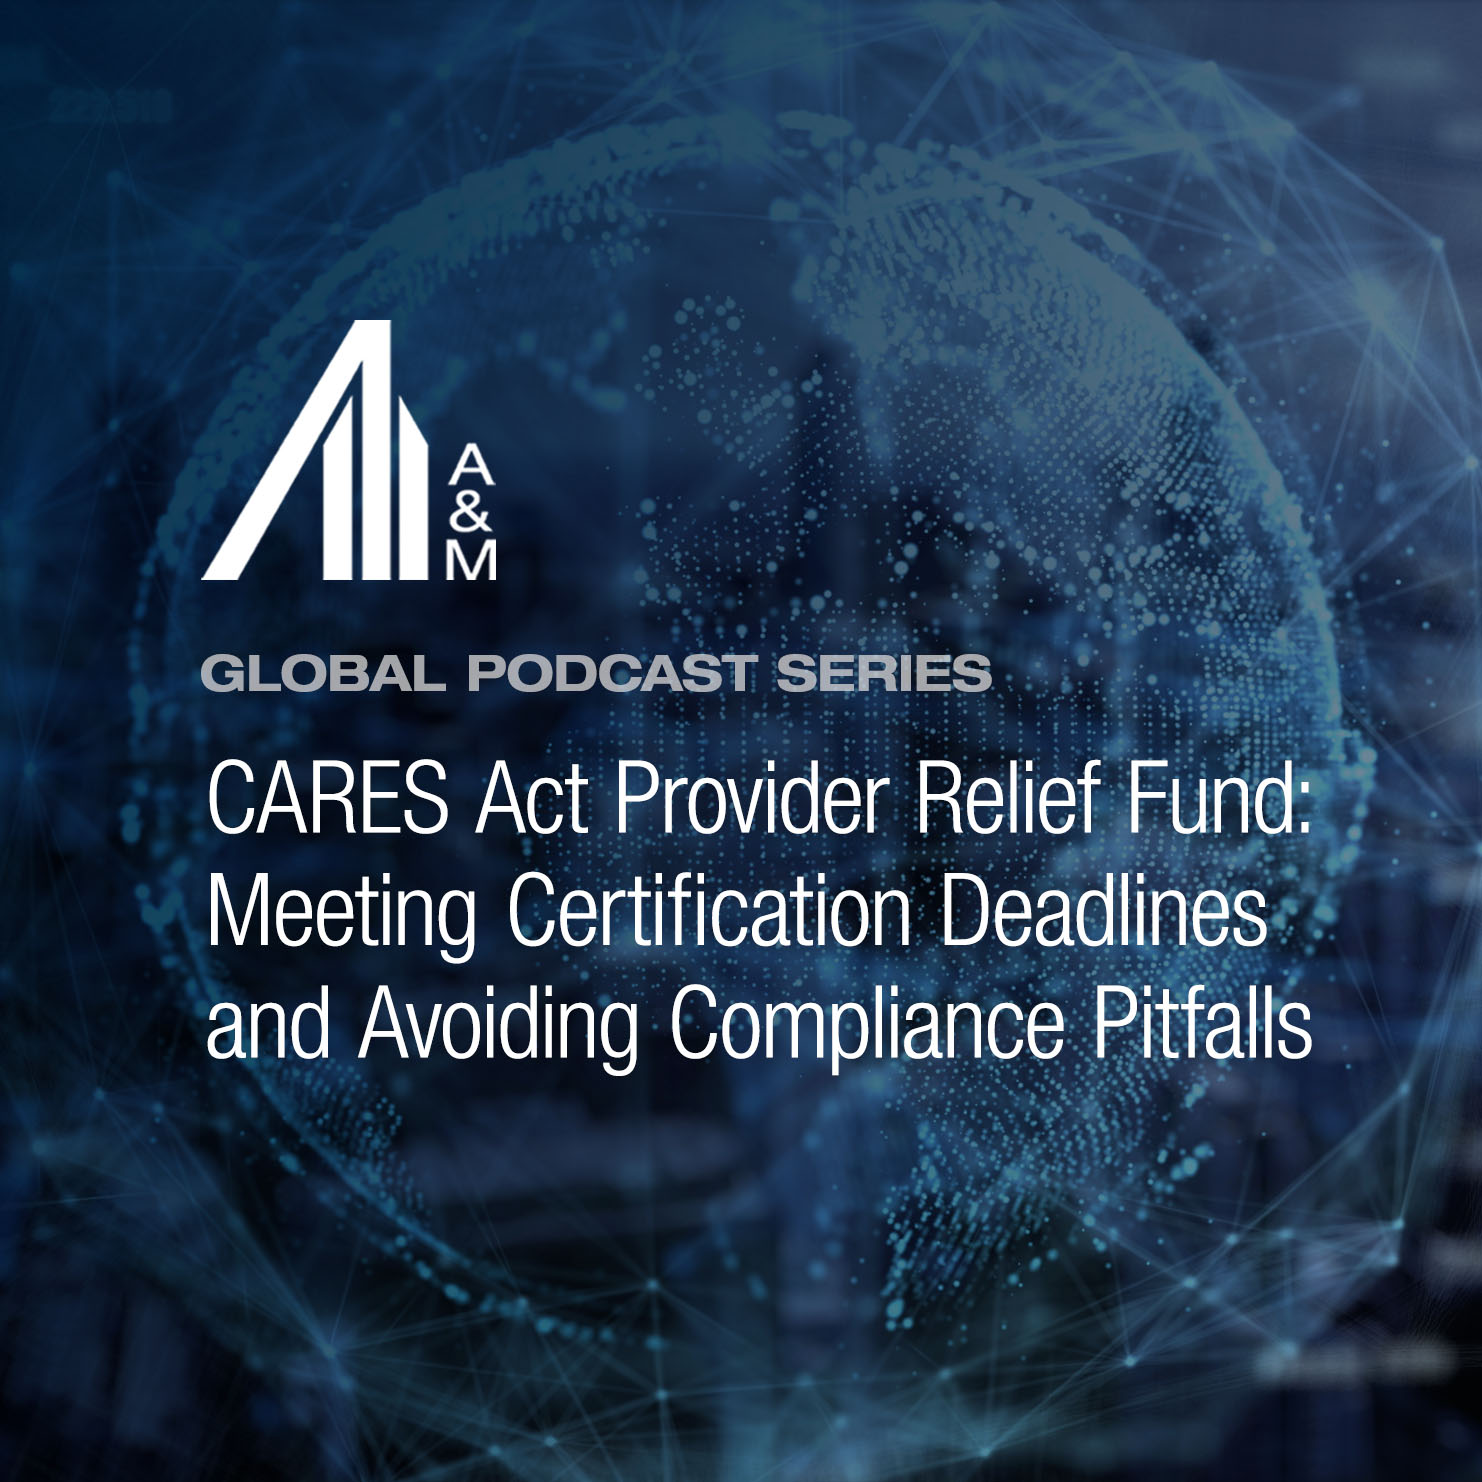 CARES Act Provider Relief Fund: Meeting Certification Deadlines and Avoiding Compliance Pitfalls